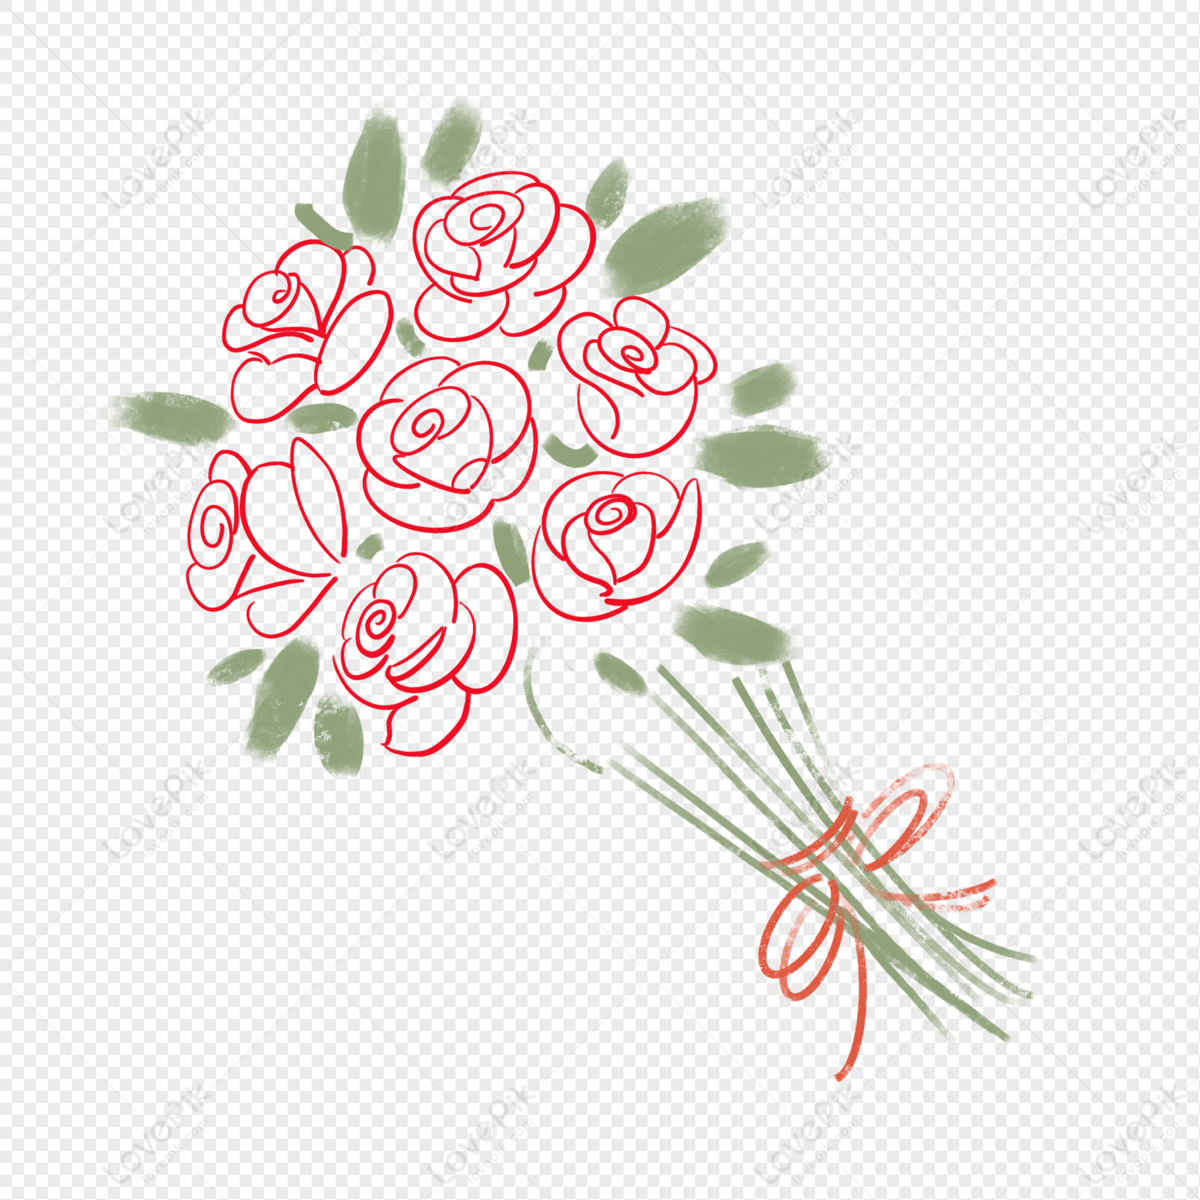 Hand Drawn Minimalist Bouquet Of Roses PNG Image And Clipart Image ...